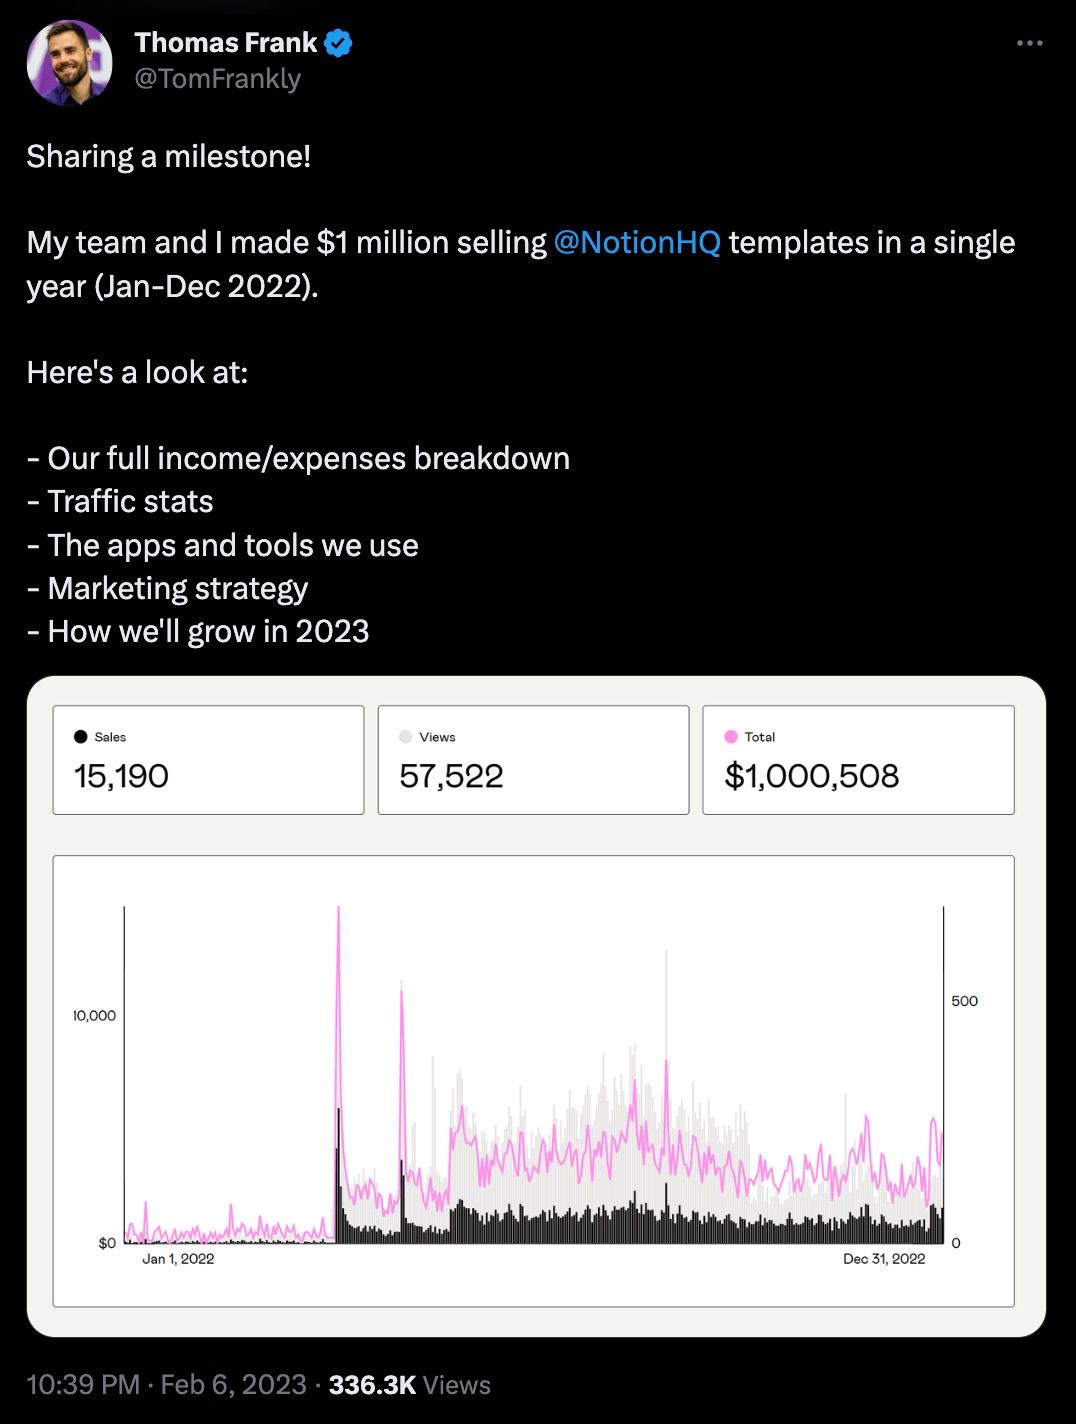 Image showing a tweet from Thomas Frank that reads: Sharing a milestone!  My team and I made $1 million selling  @NotionHQ  templates in a single year (Jan-Dec 2022).  Here's a look at:  - Our full income/expenses breakdown - Traffic stats - The apps and tools we use - Marketing strategy - How we'll grow in 2023